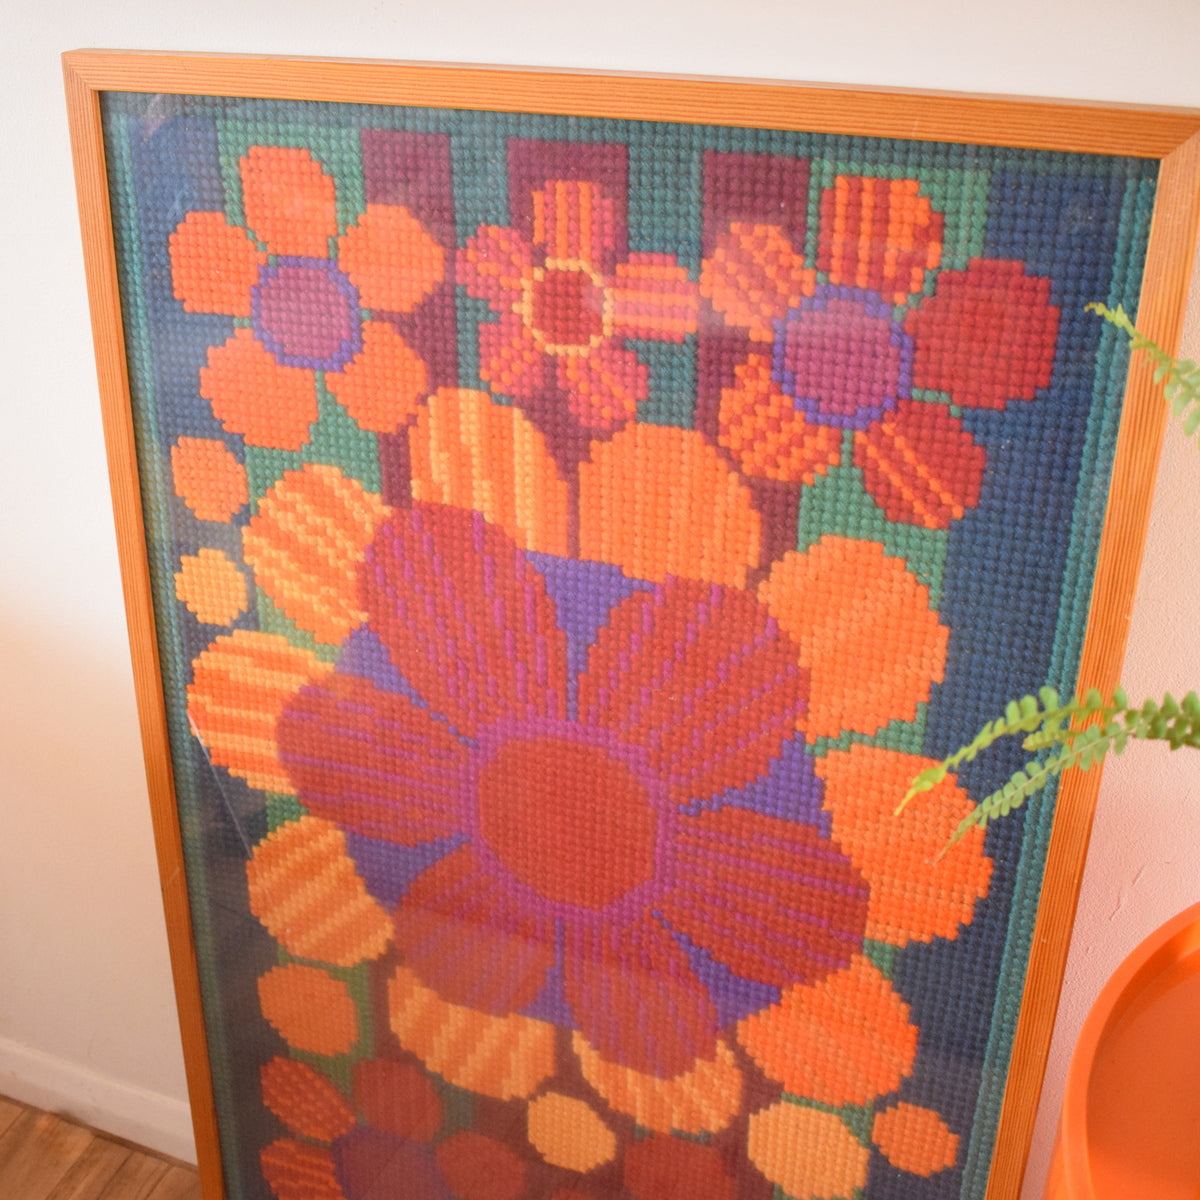 Vintage 1960s Fantastic Large Swedish Embroidery Picture - Flower Power